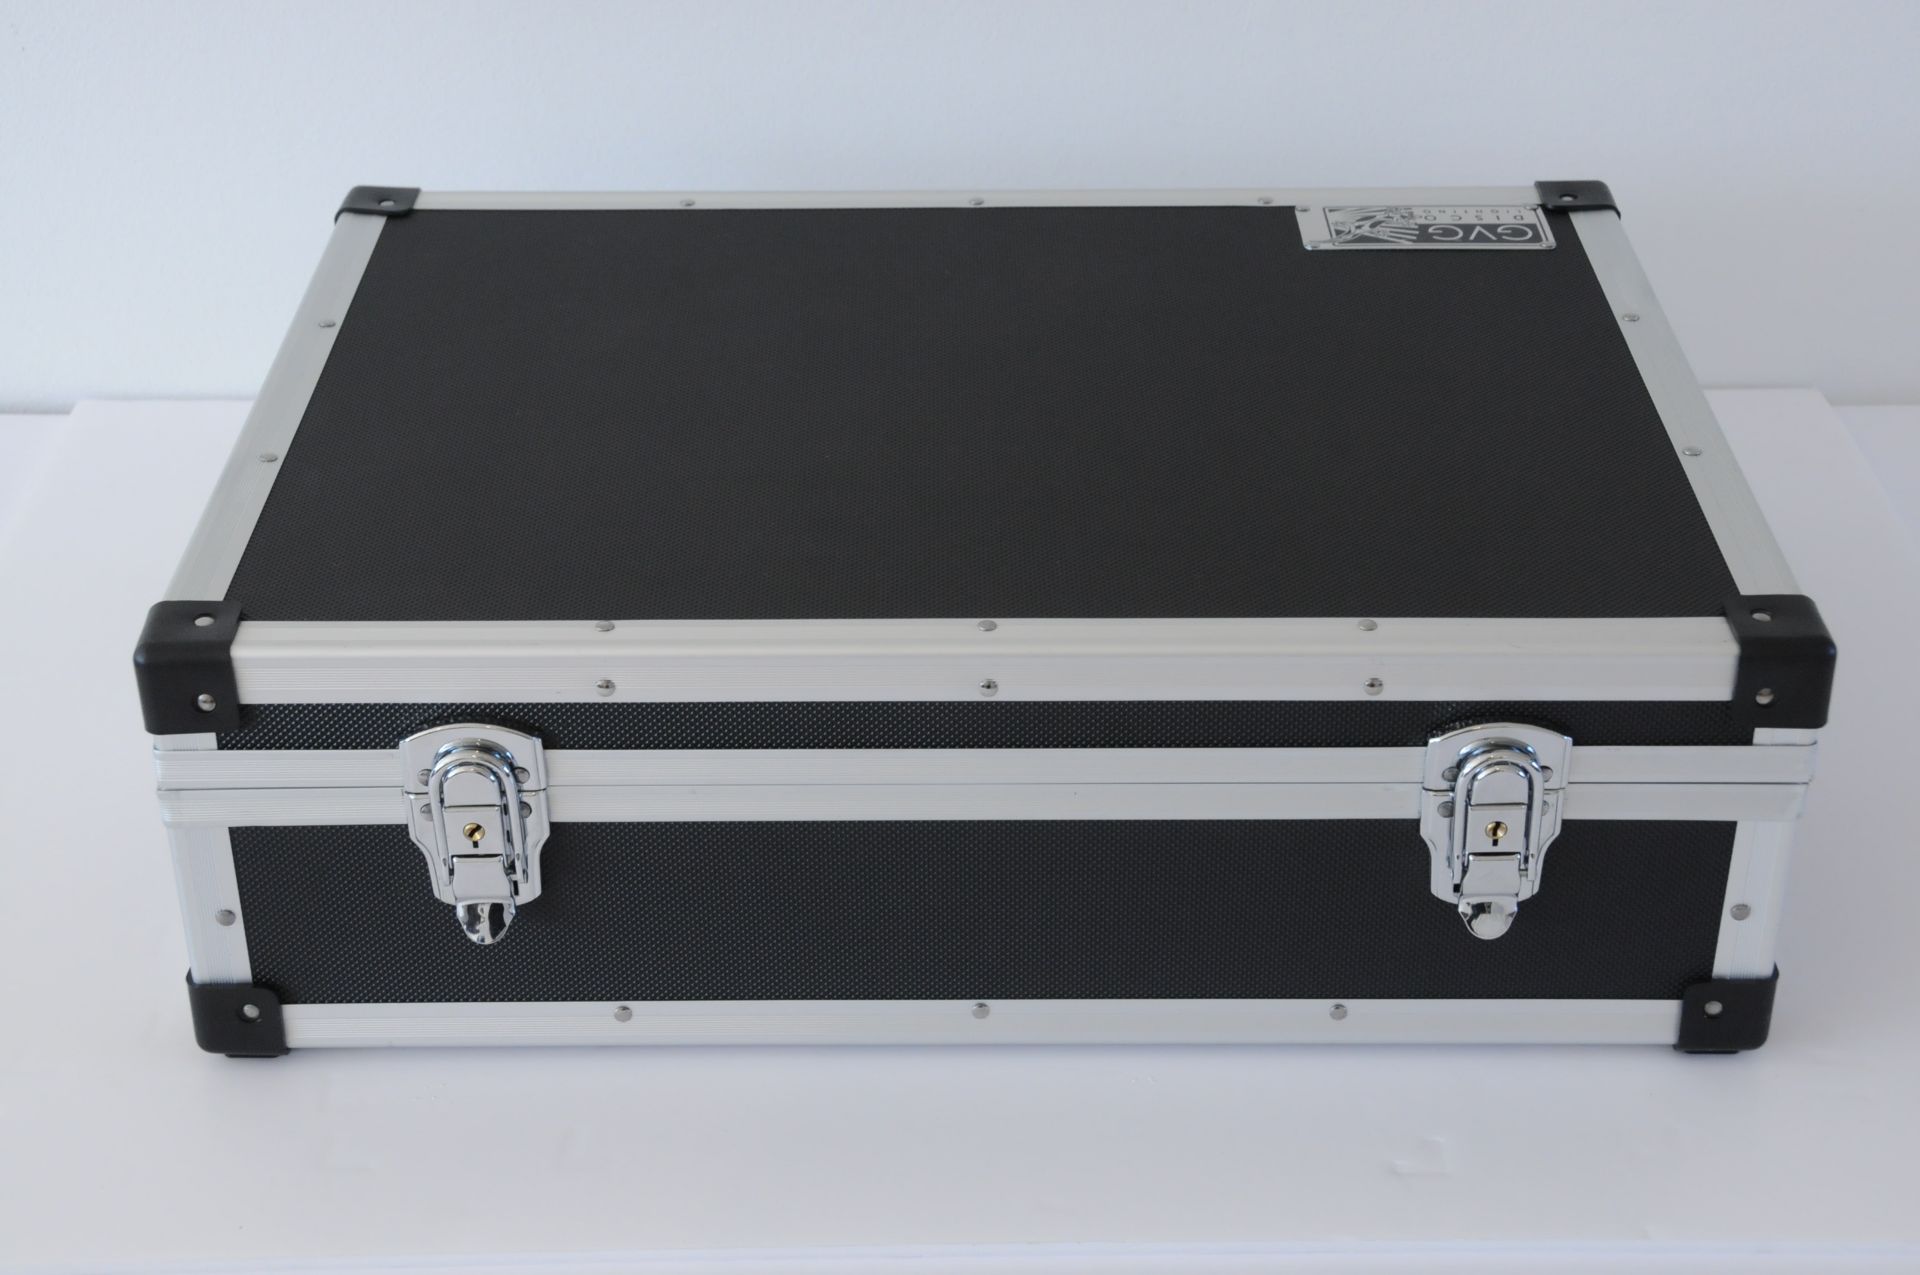 Grade U Case Of 4 Professional LED Disco Lights (GVG220) In Flight Case-Sound Activated & Manual - Image 4 of 4